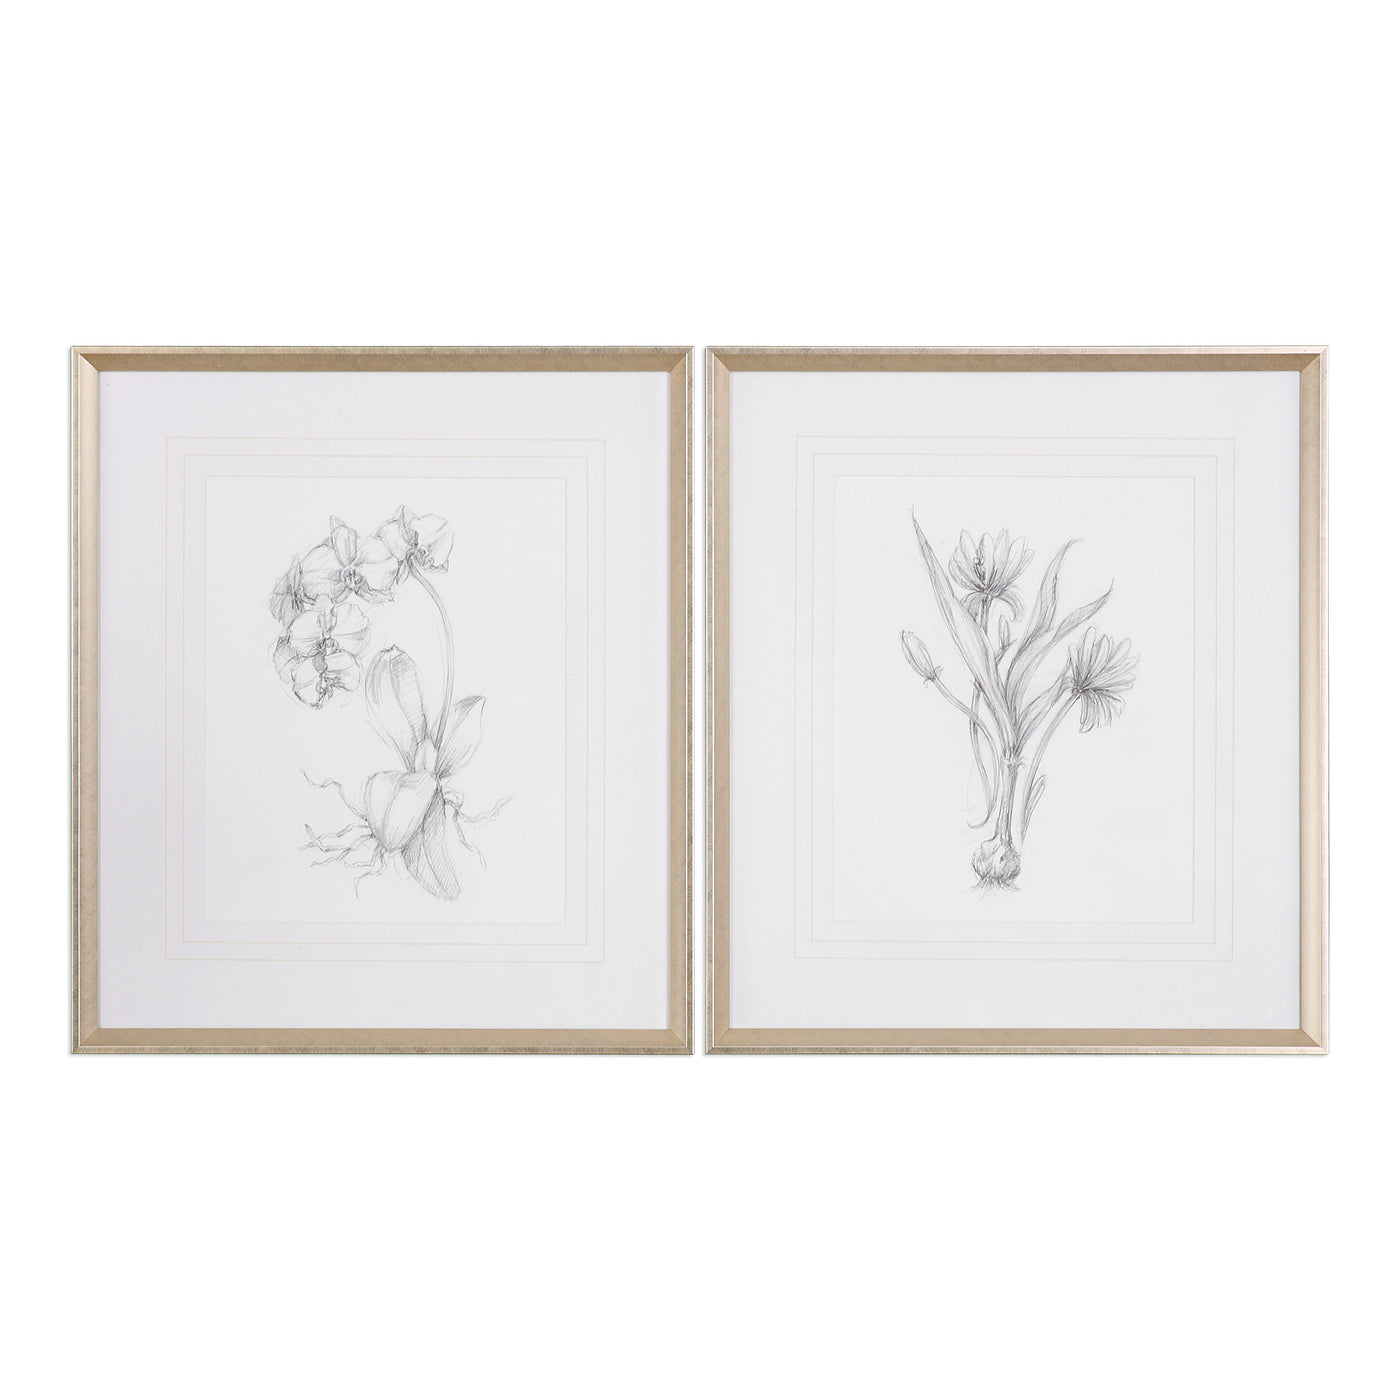 Minimalist In Design, These Simple Floral Sketches Work Seamlessly With A Variety Of Styles. Each Sketch Is Surrounded By ...